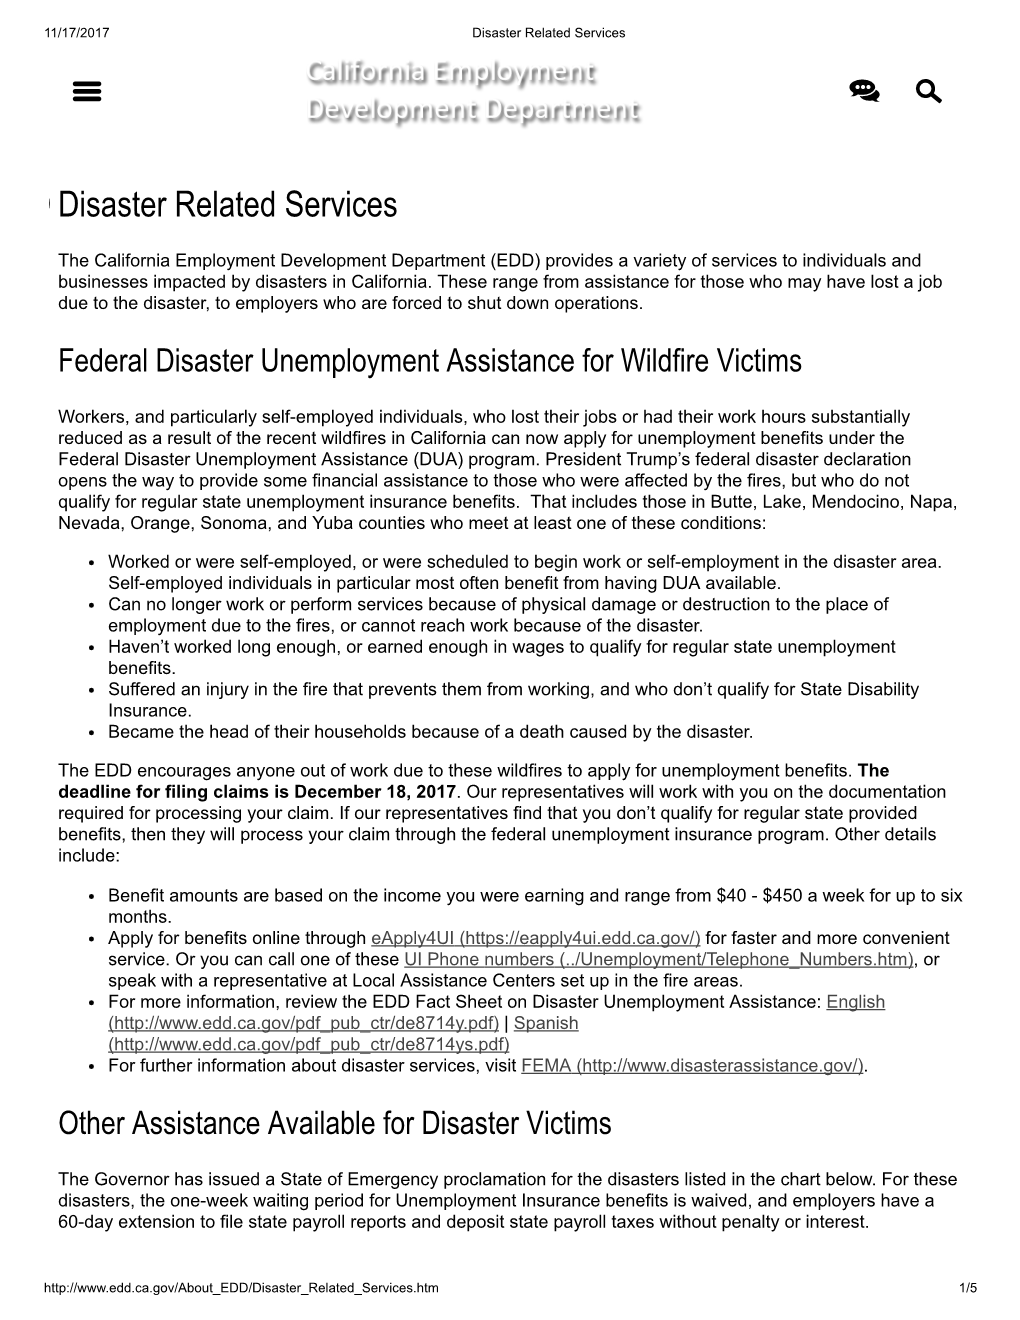 Disaster Related Services   